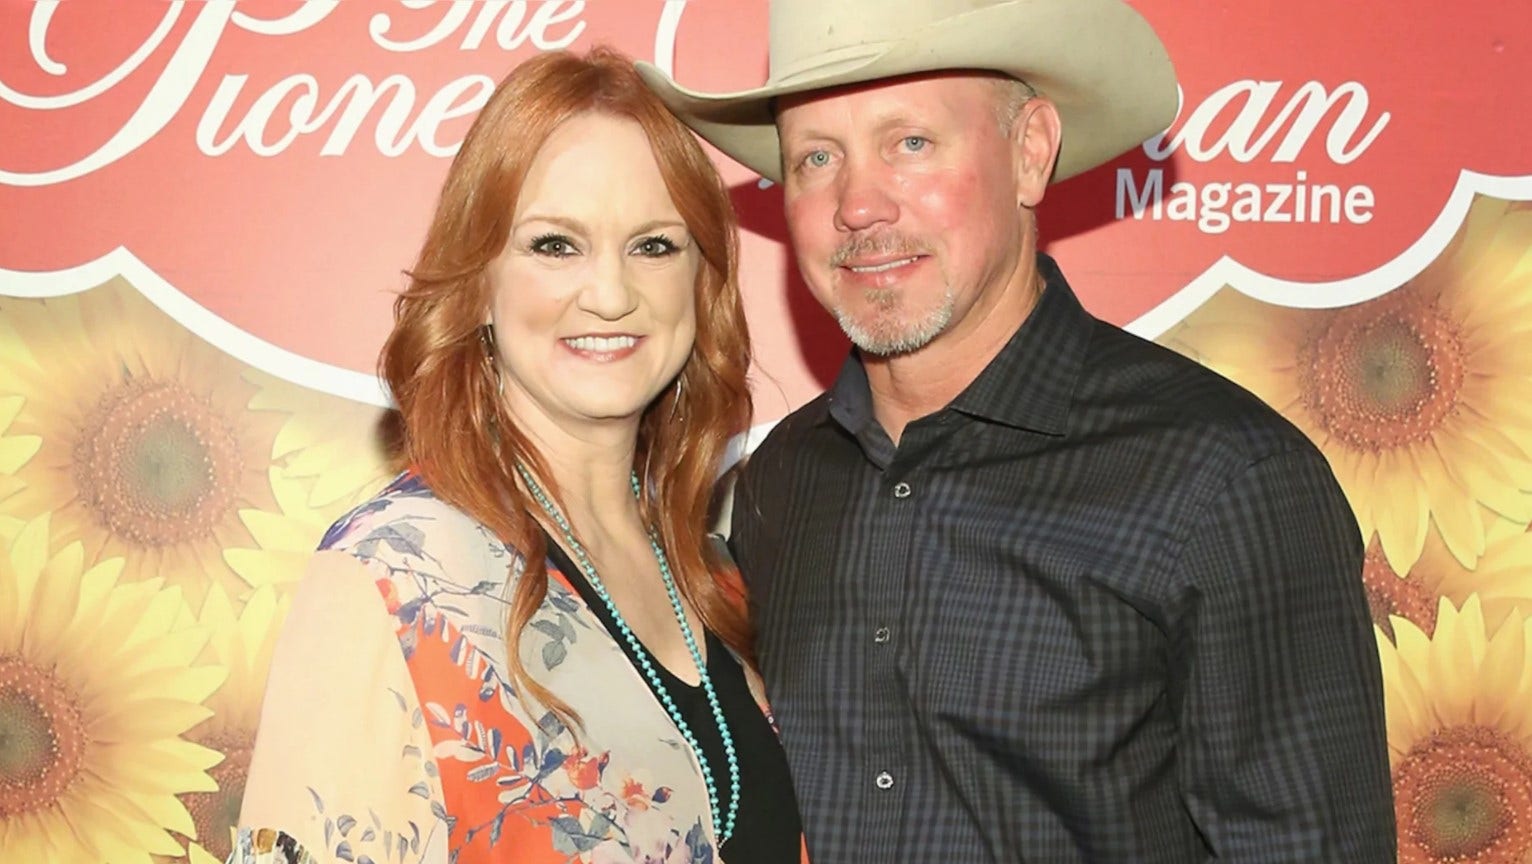 Ree Drummond says her husband Ladd broke his neck in the accident: It was “very close to being catastrophic”